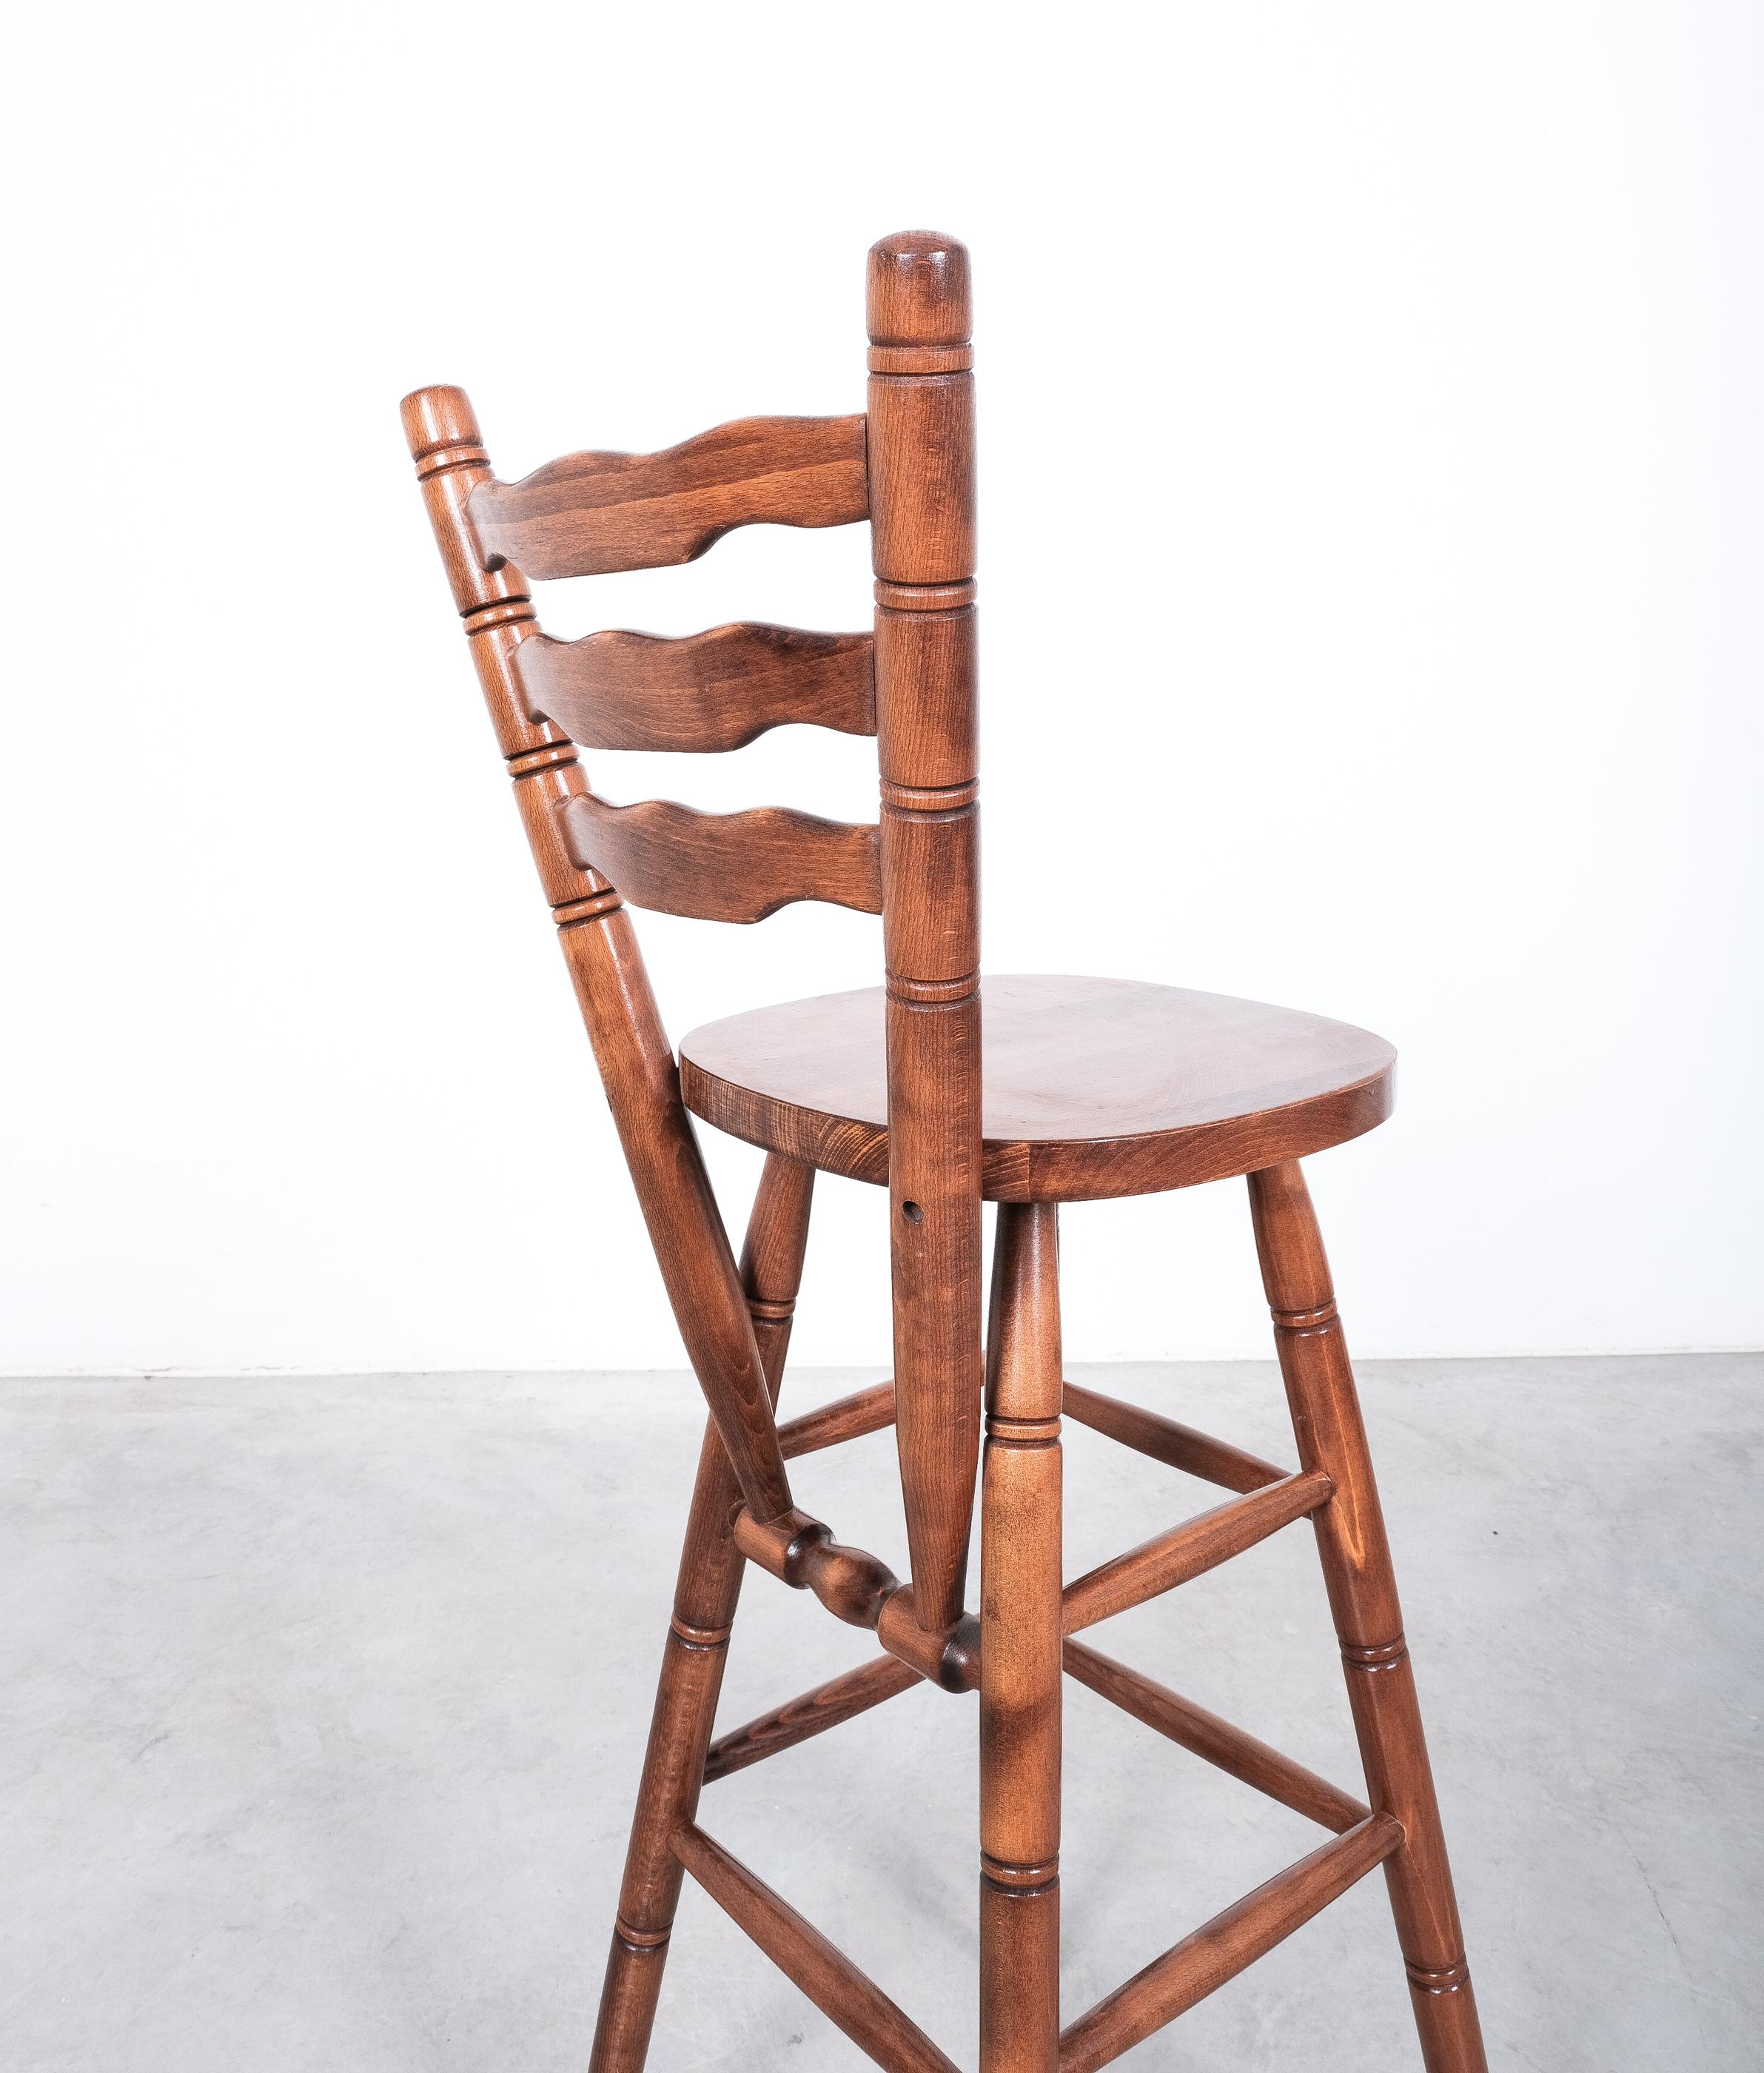 Rustic Bar Stools Midcentury from Birch Wood, Germany, 1970 For Sale 3